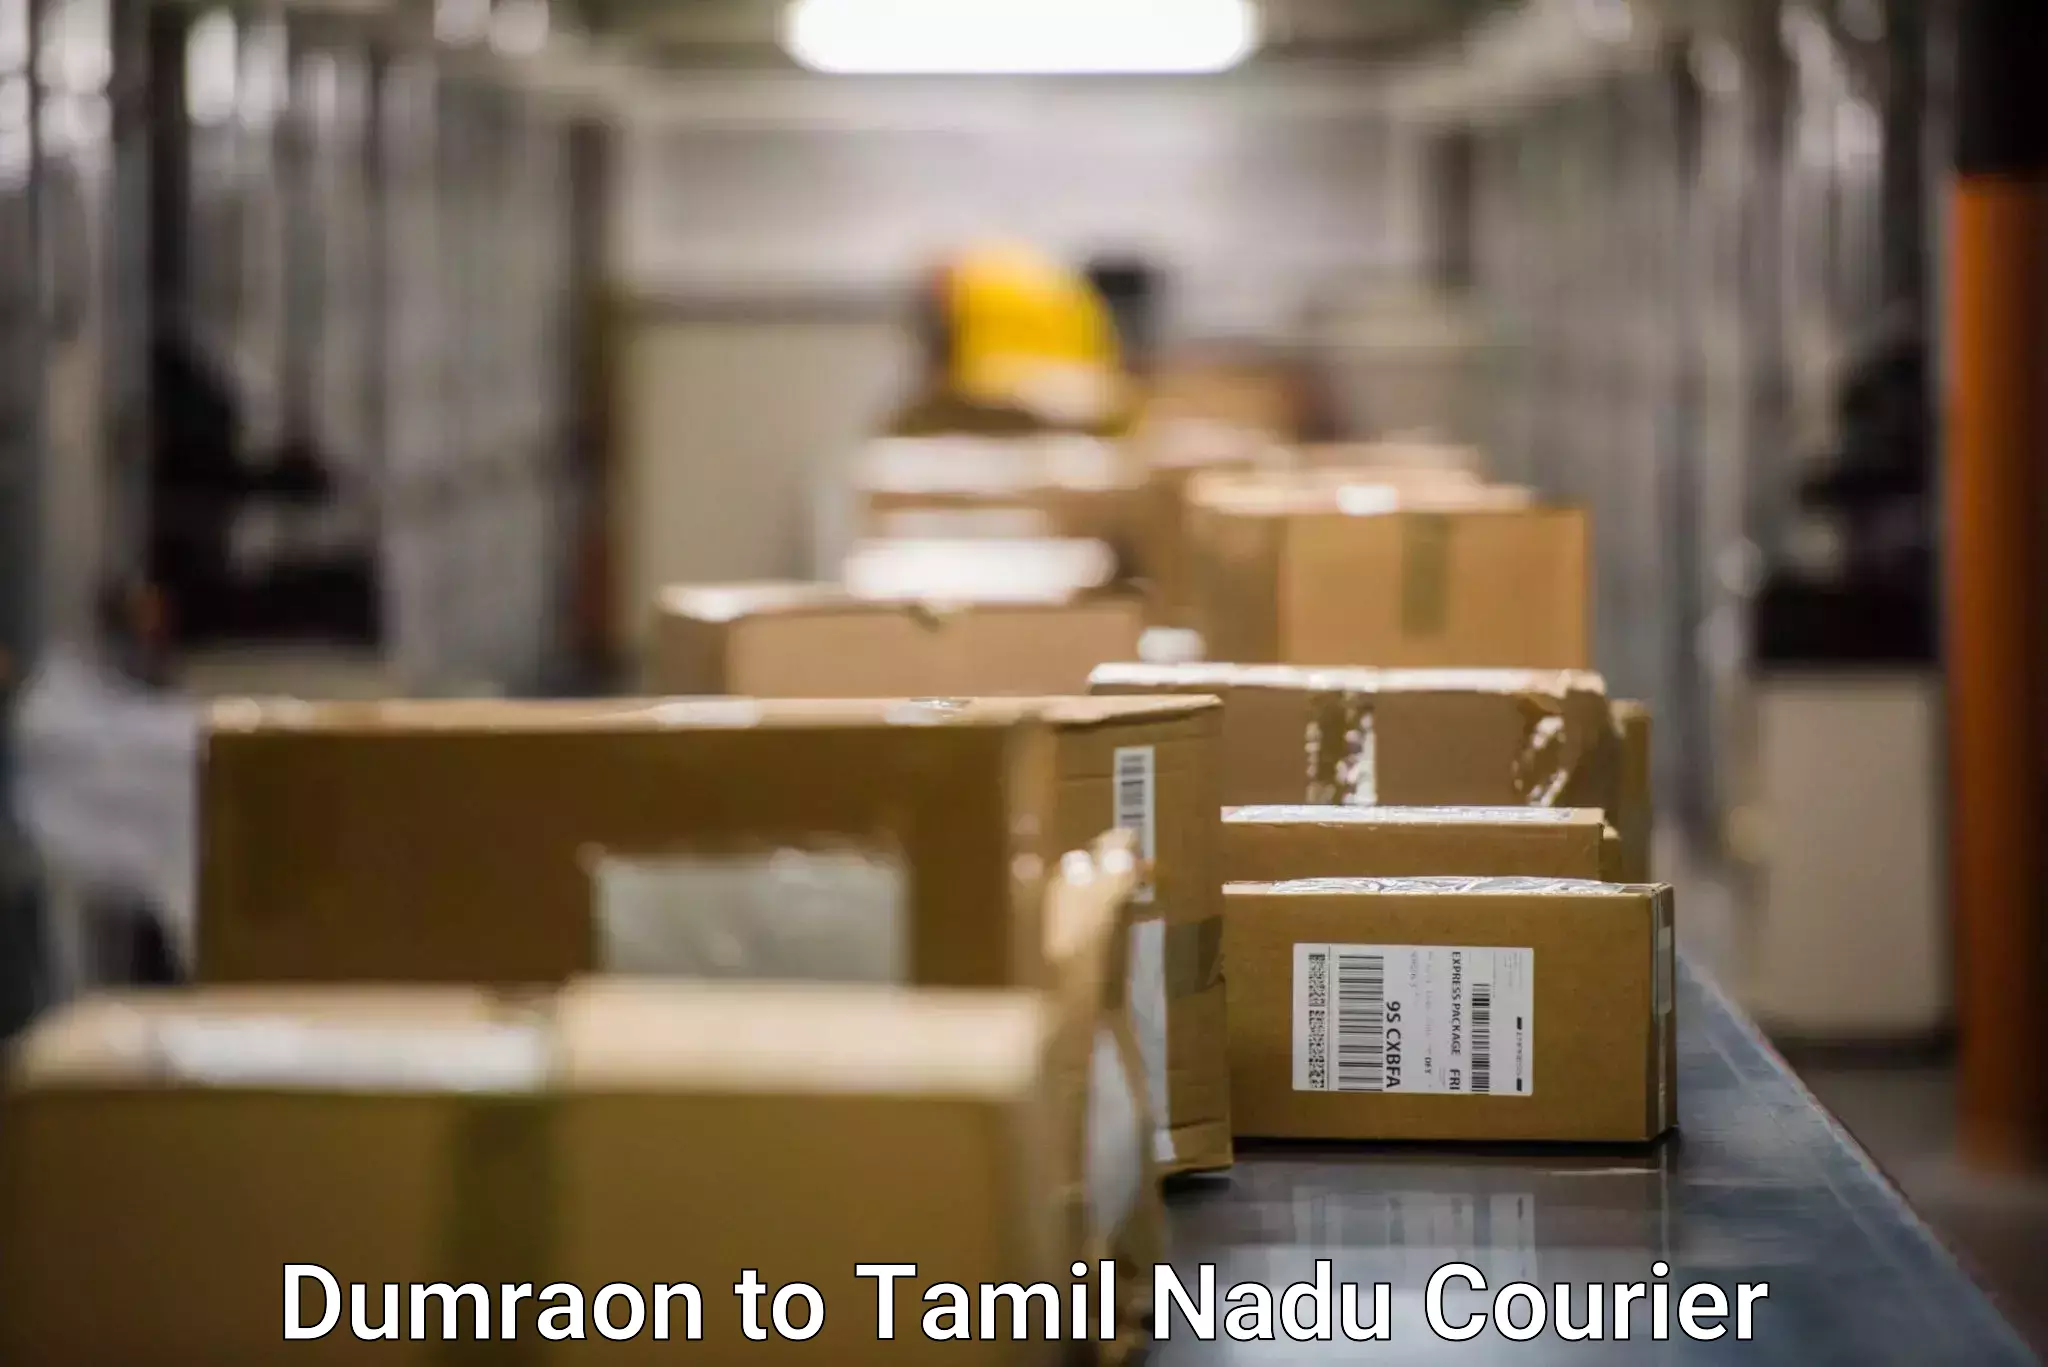 Reliable delivery network Dumraon to Chennai Port